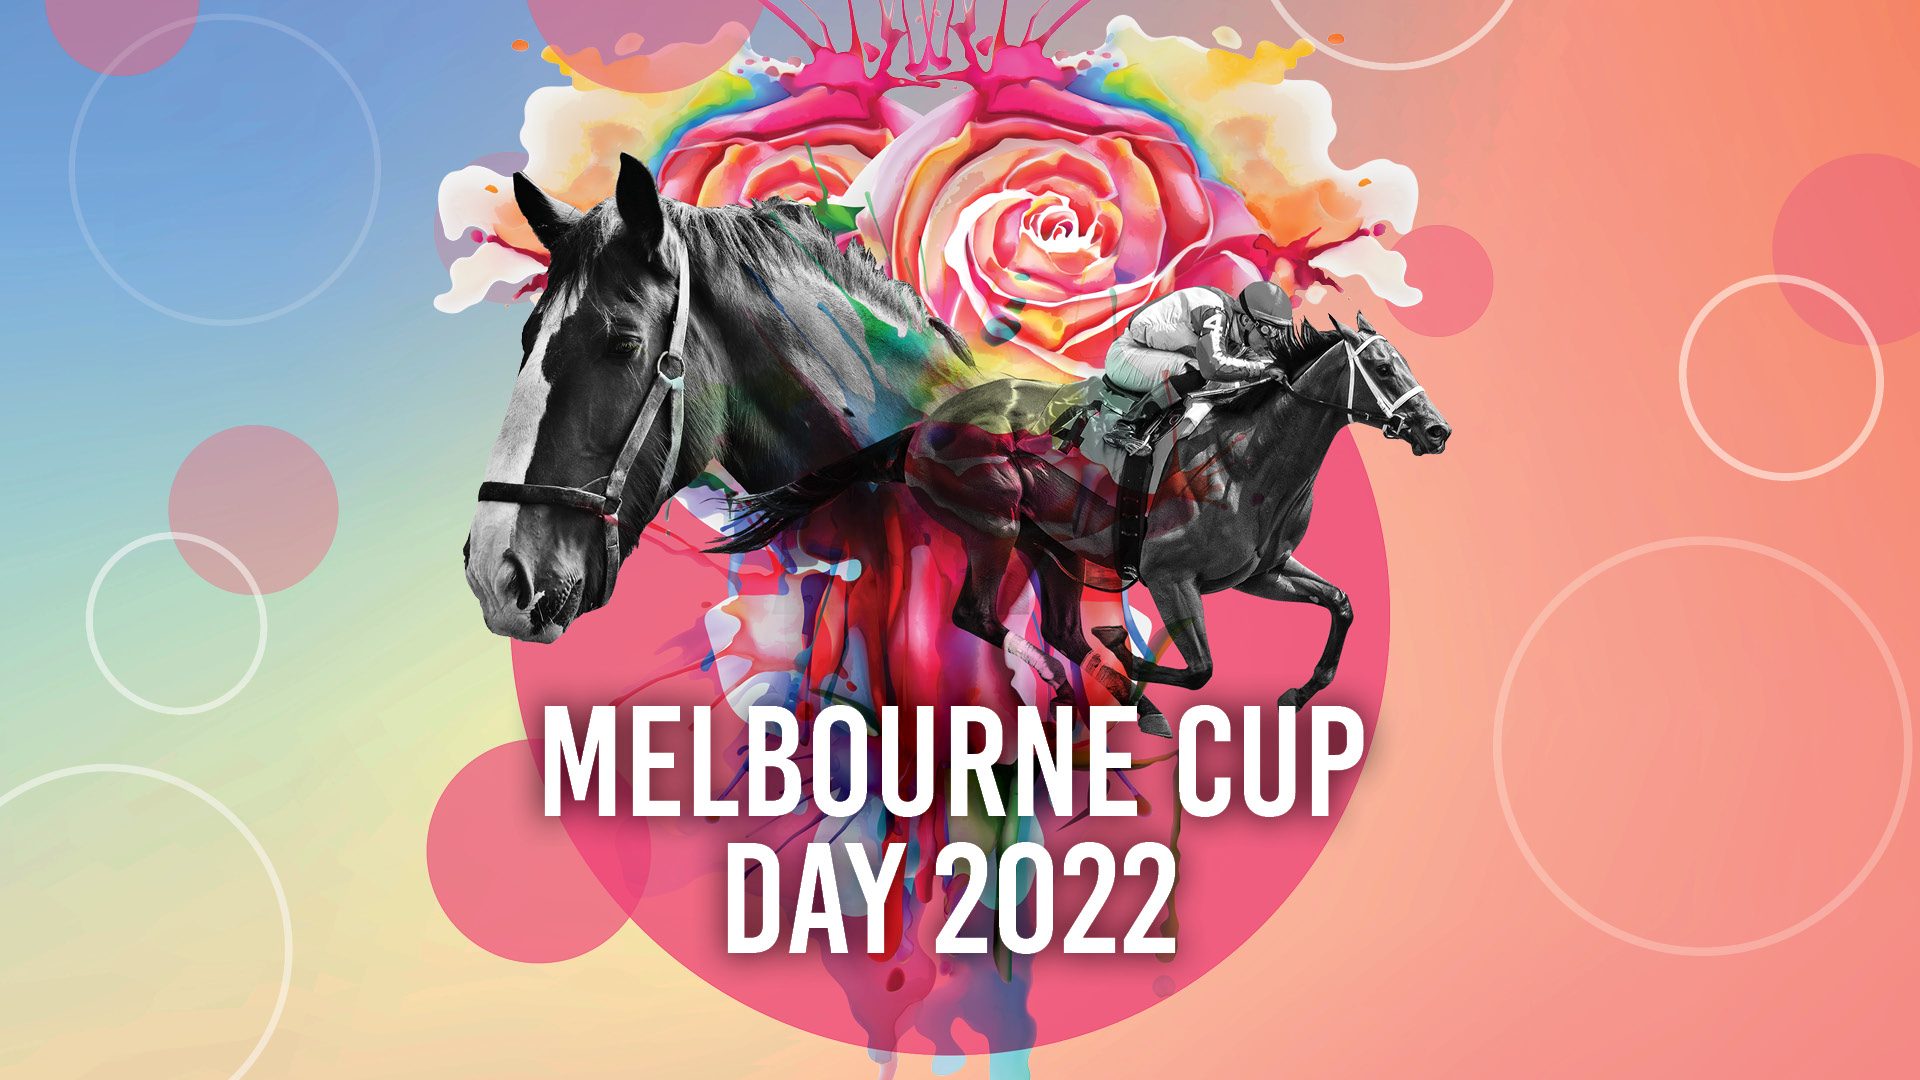 North Lakes Sports Club Melbourne Cup Day 2022 - North Lakes Sports Club